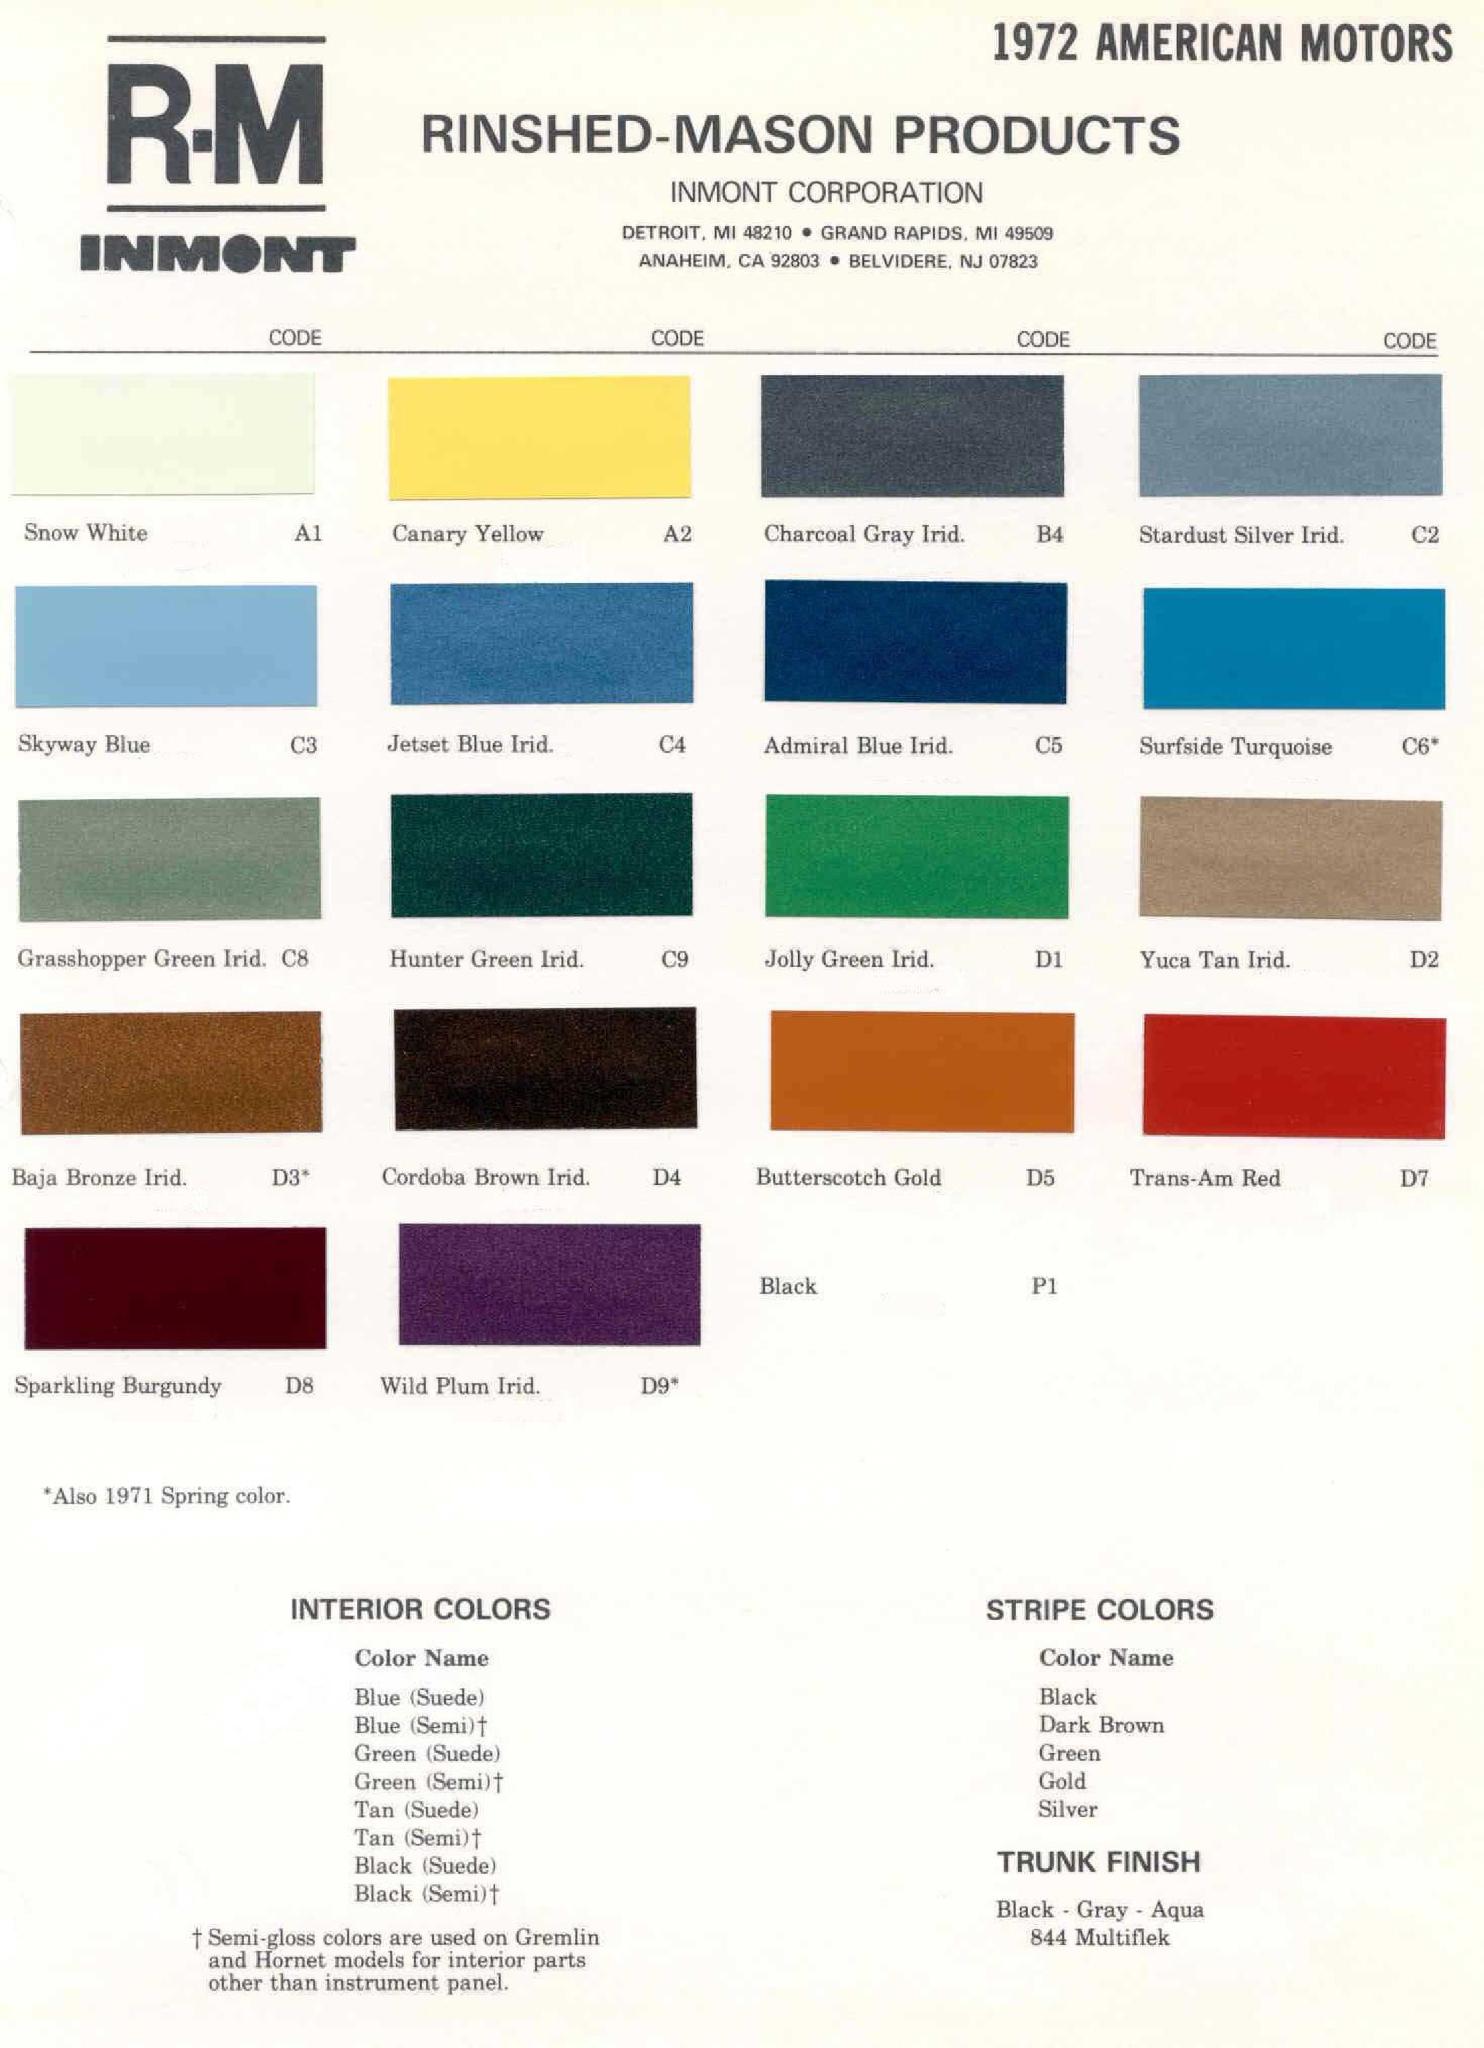 Colors Used on AMC in 1972